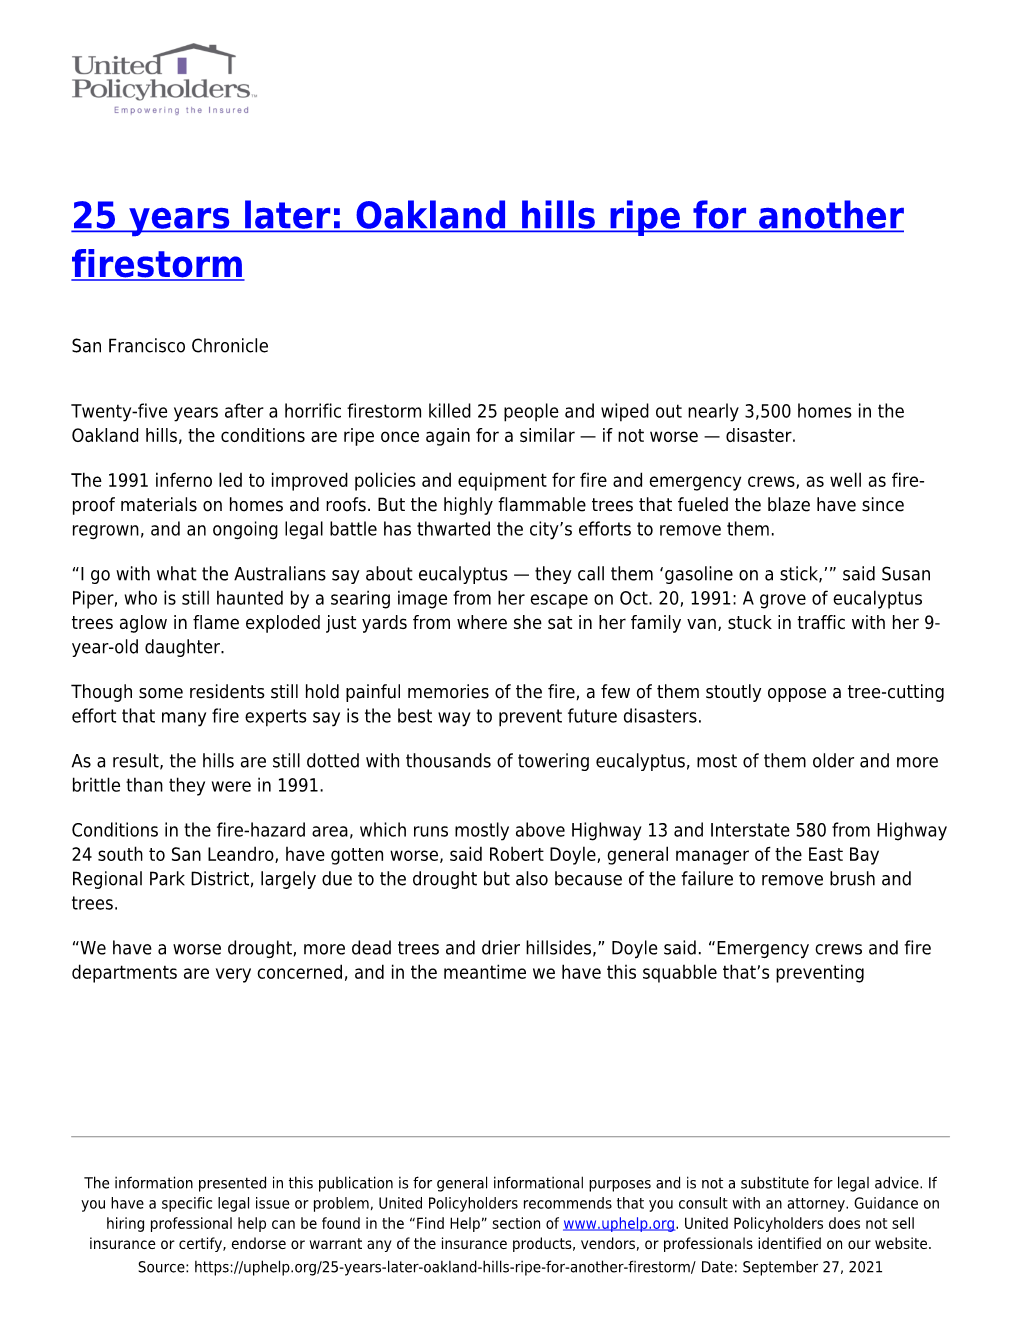 Oakland Hills Ripe for Another Firestorm